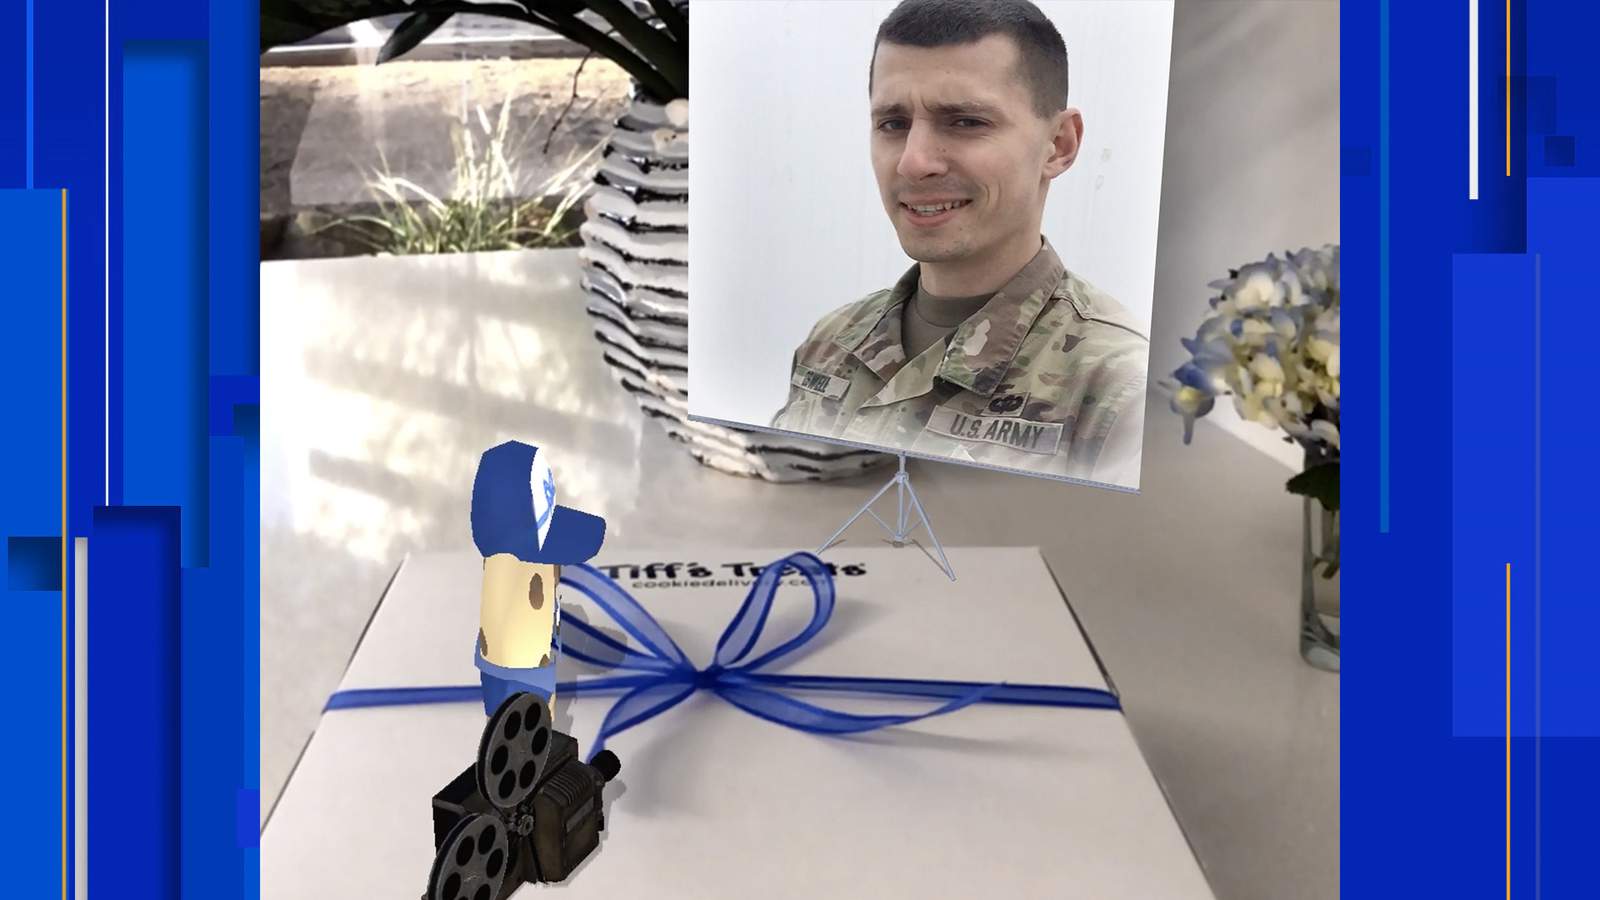 Tiffs Treats program allows soldiers to send free cookies, video message to their families